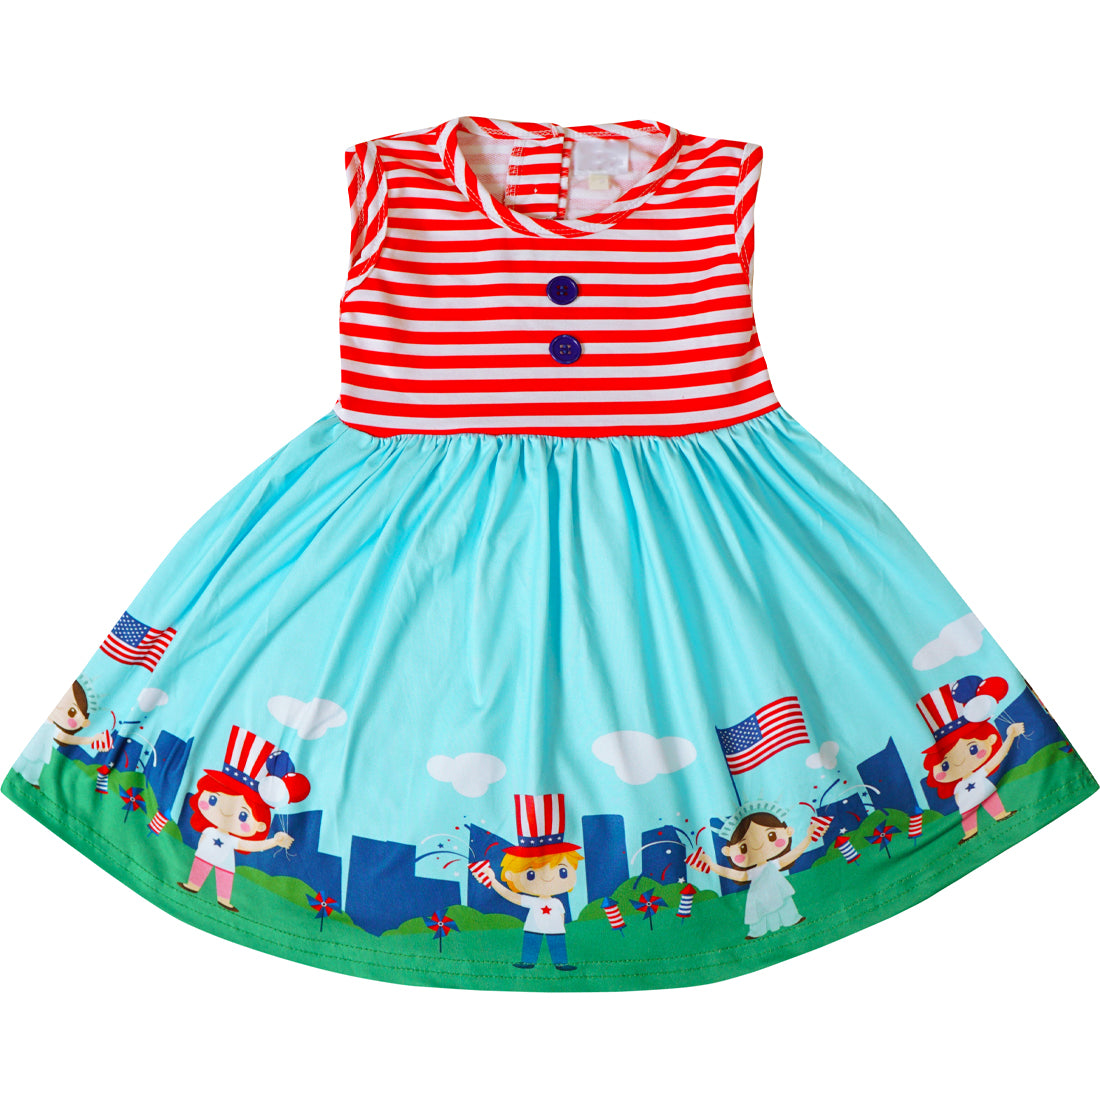 Baby Toddler Little Girls 4th of July Patriotic Dress - Red Stripes - Angeline Kids